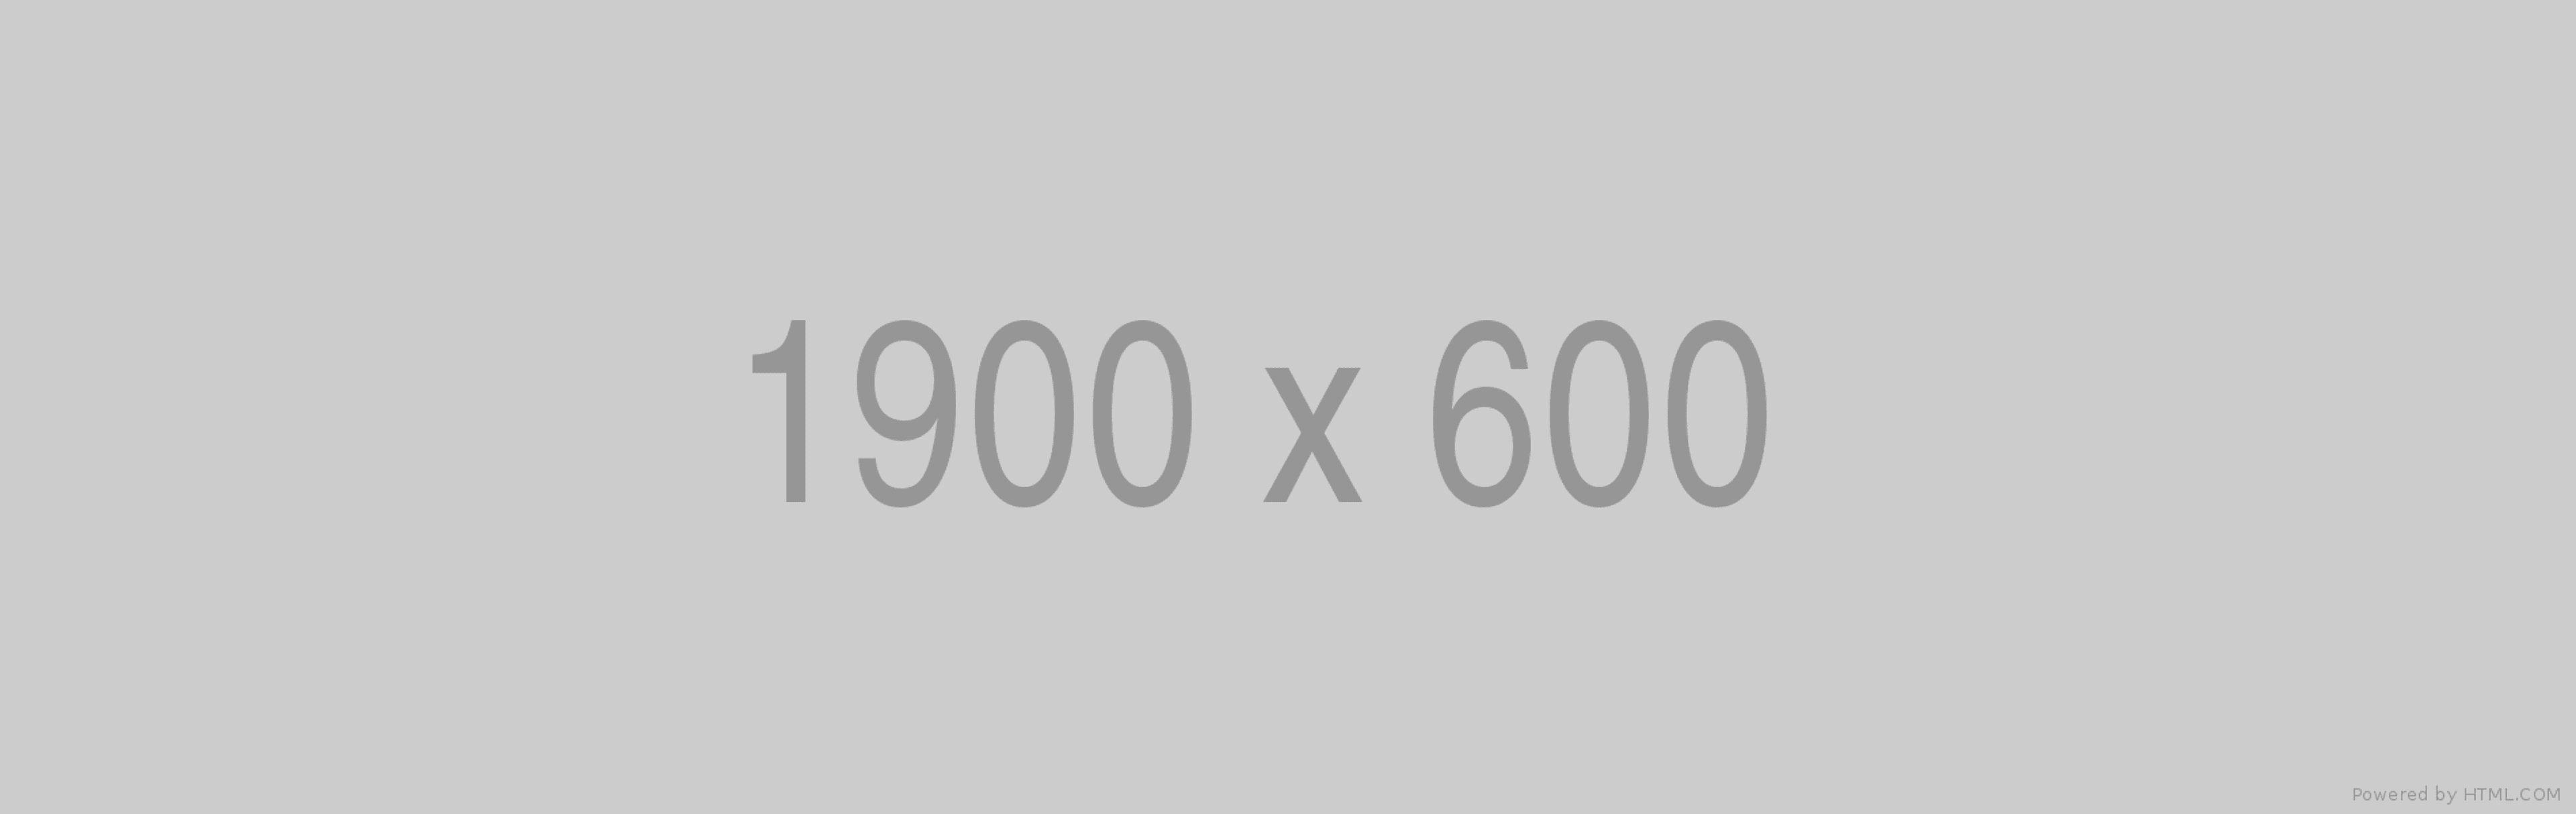 This is a placeholder image with dimensions 1900 by 600